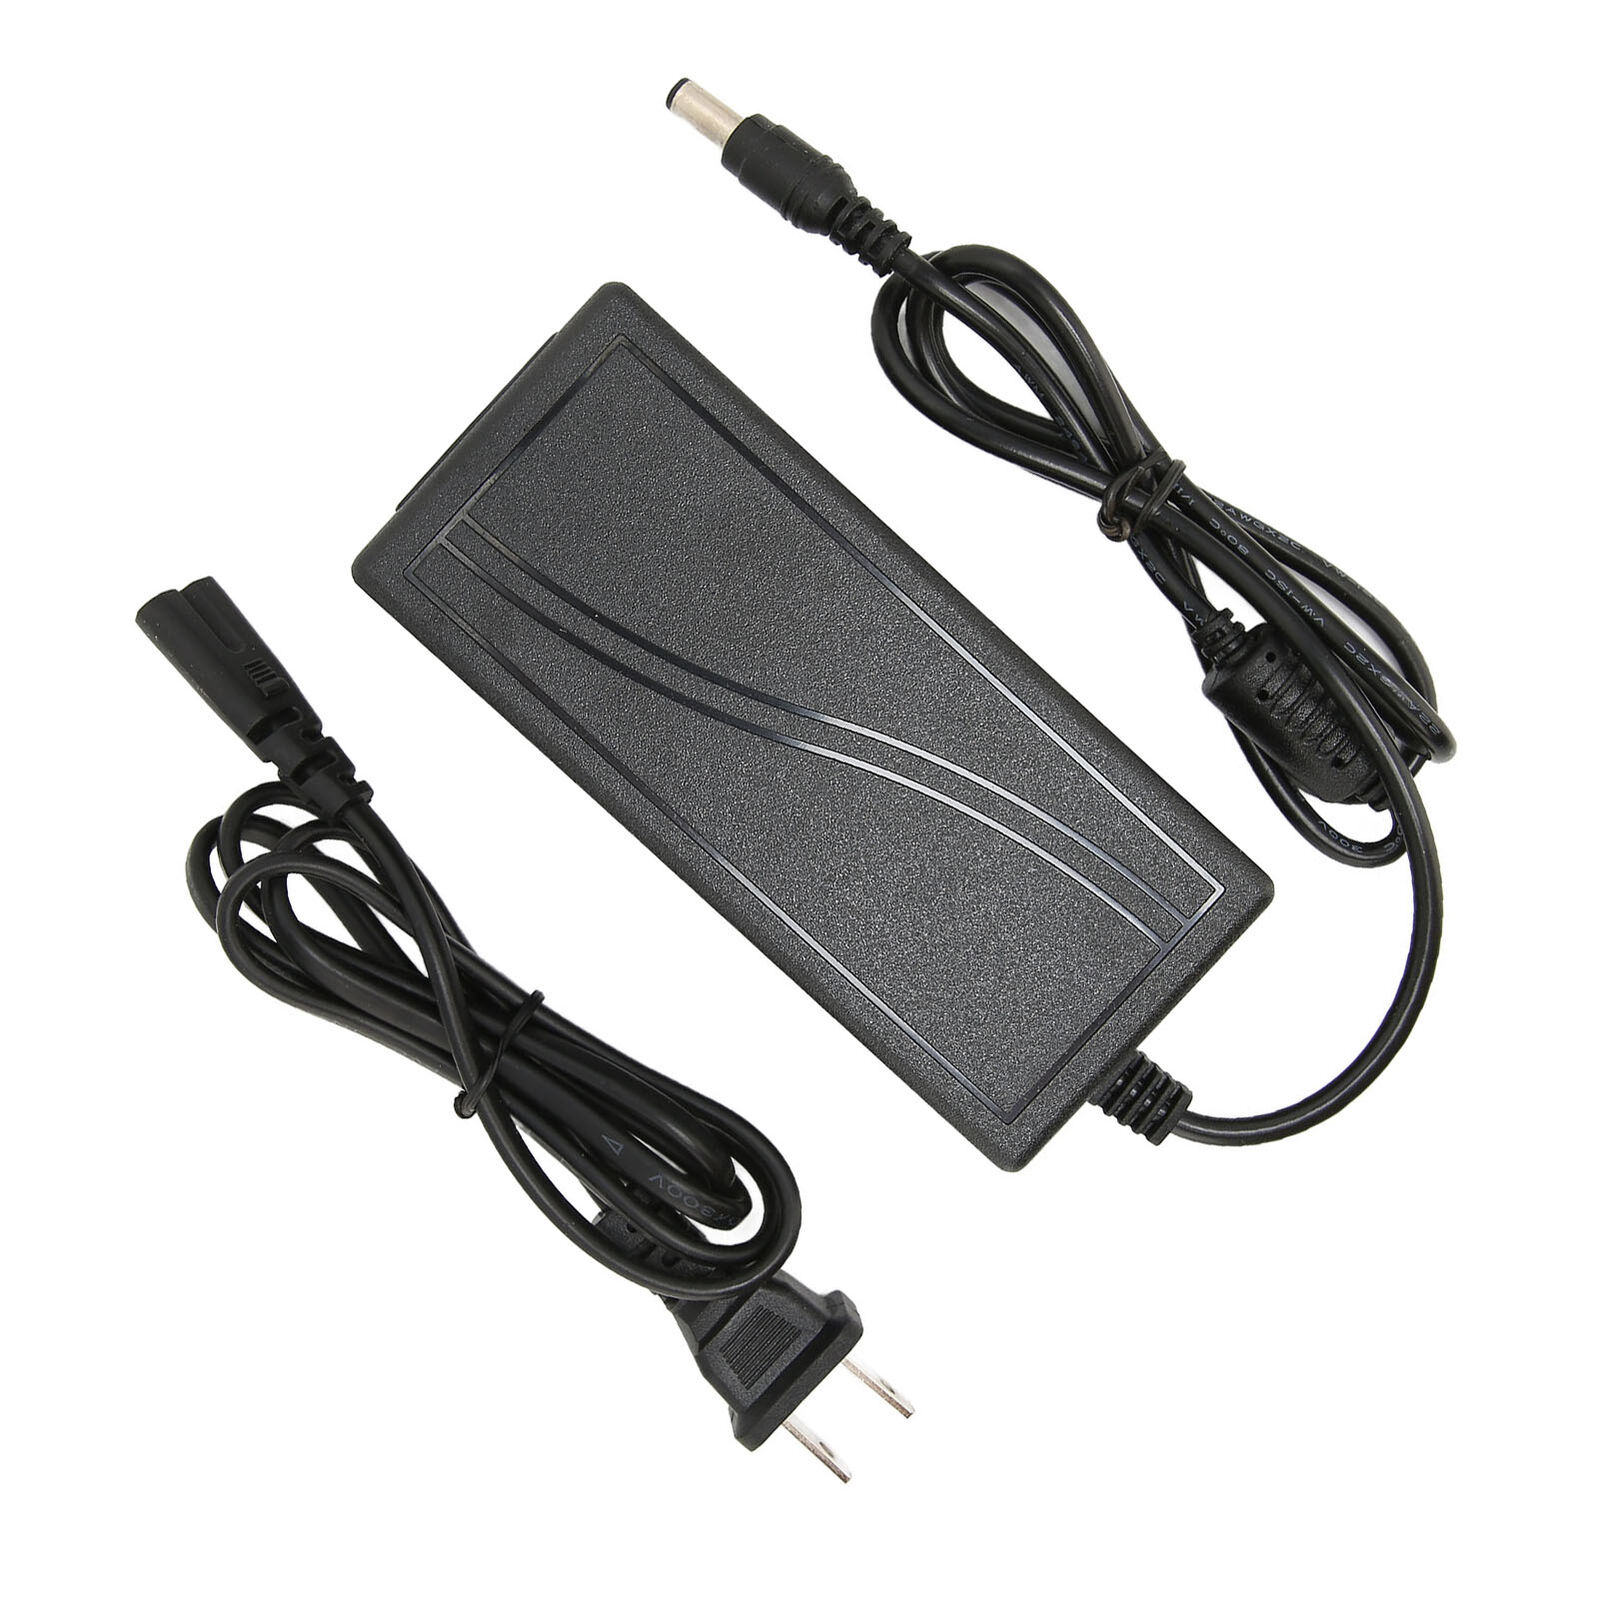 DC 22.5V Power Supply Charging Adapter Power Charger for Robot Sweeping Discover Brand: Unbranded Input Voltage: AC